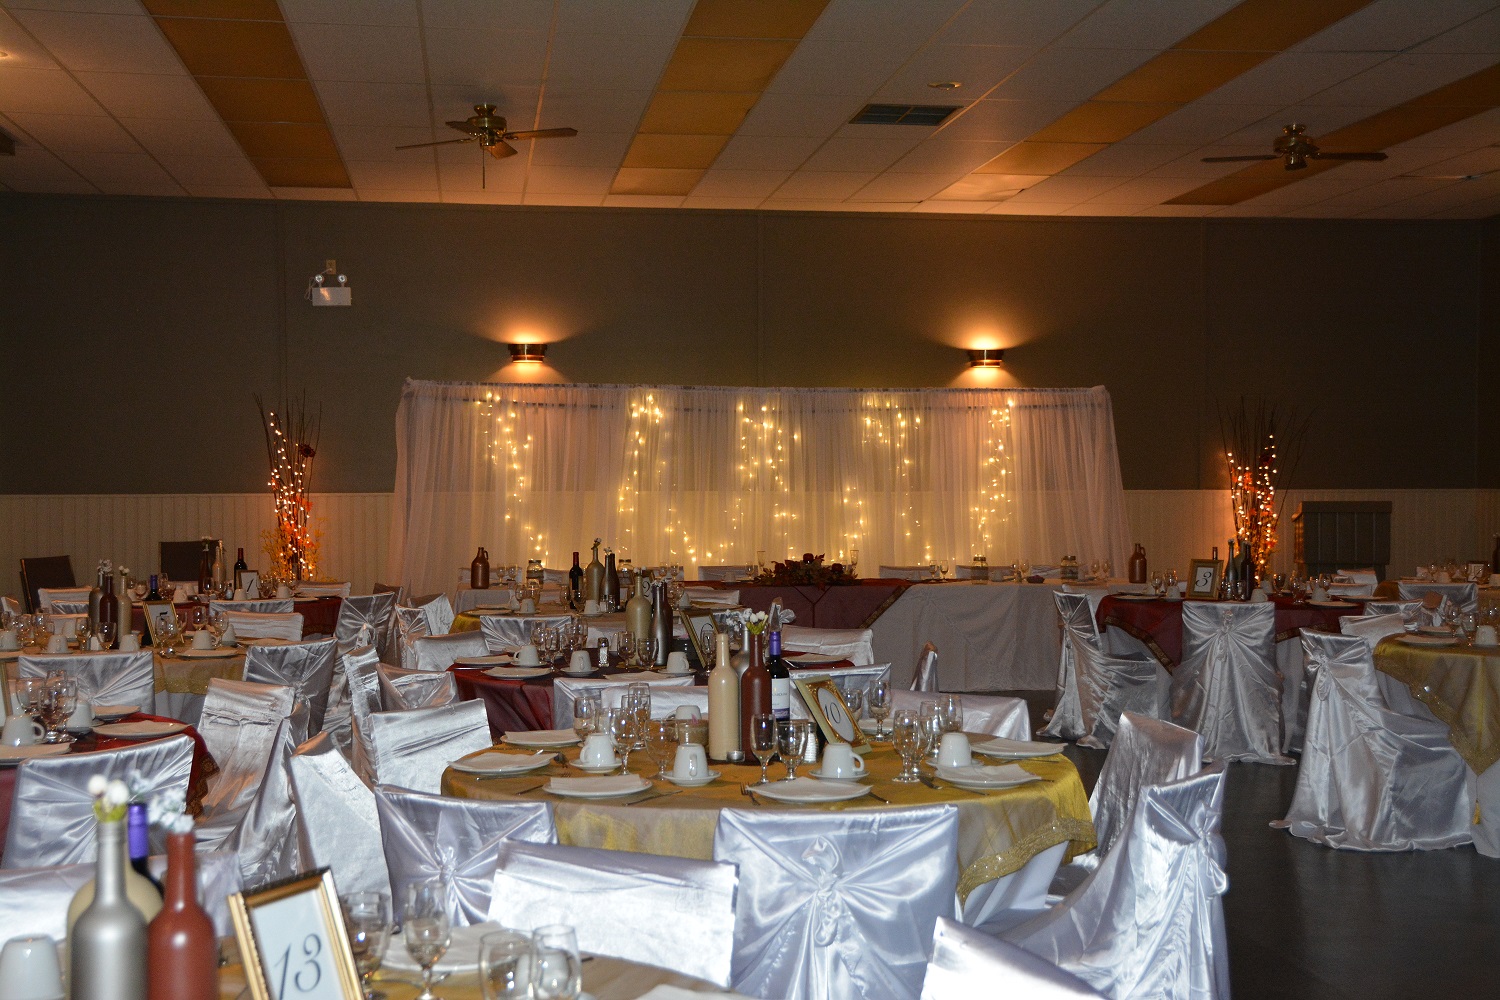 room with tables decorated with yellow tableclothes and set with white dishes, chairs around the tables with white covers, a head table with a backdrop hanging behind with lights